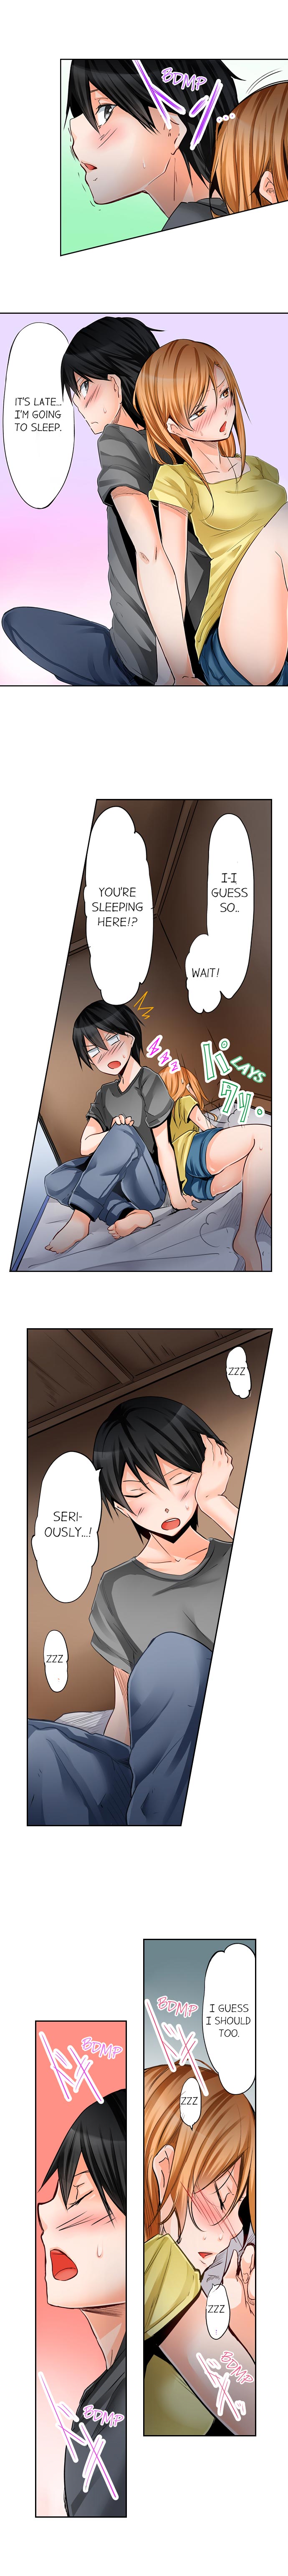 The Secret 3P Sleepover in a 7 Square Meter Room - Chapter 4 Page 3